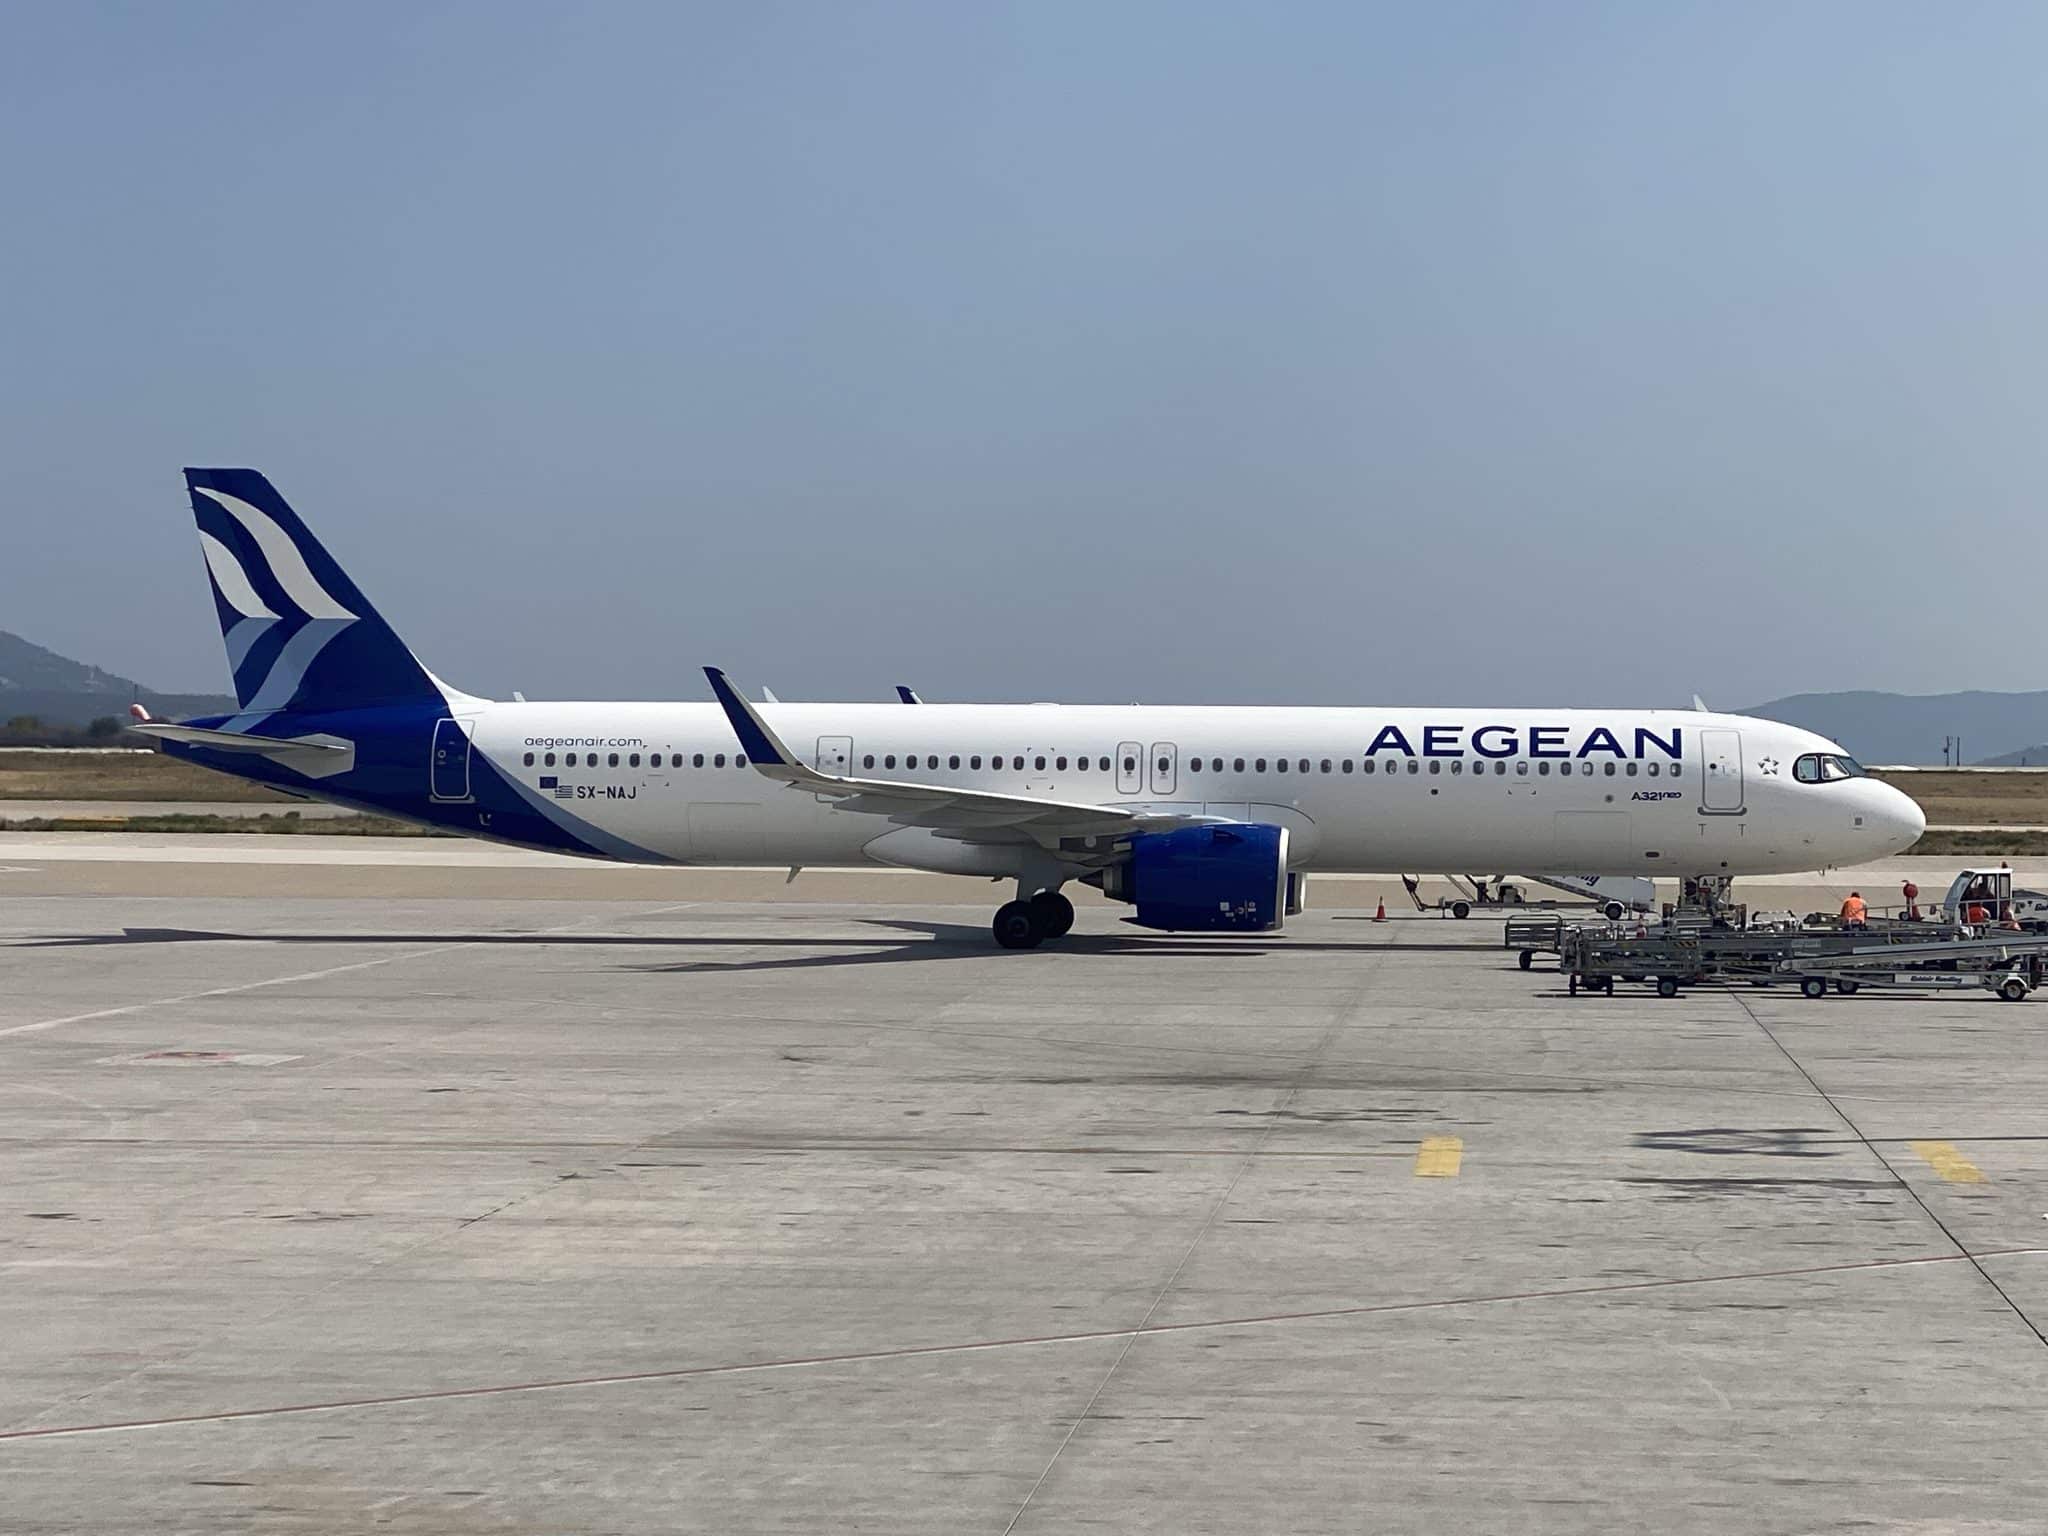 AEGEAN expands connectivity with new daily flight to London Heathrow and increased frequencies